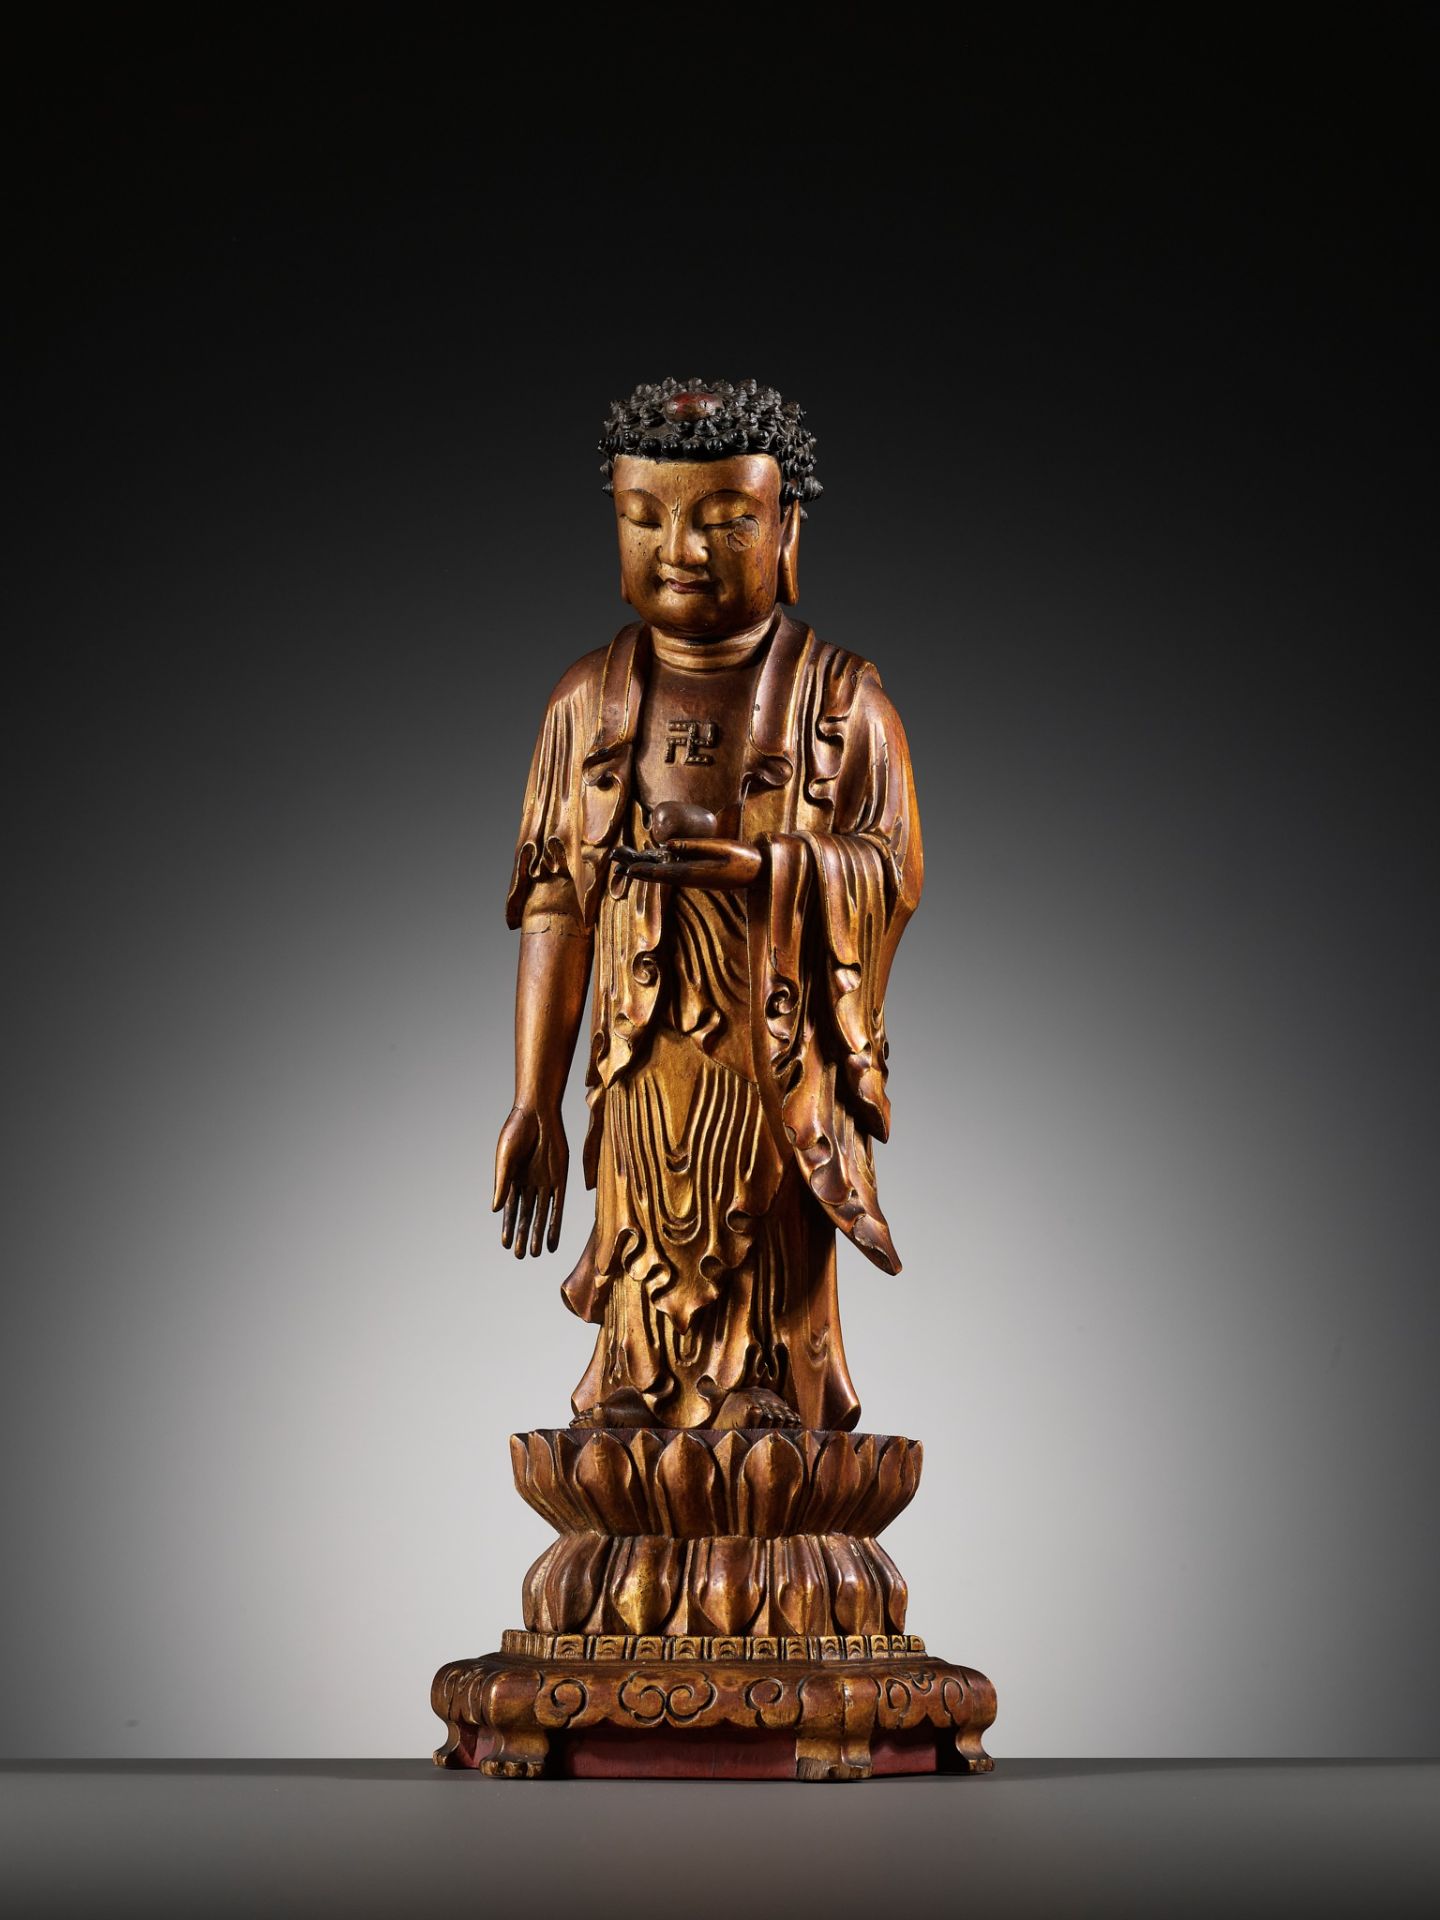 A LACQUER-GILT WOOD FIGURE OF THE STANDING BUDDHA, CHINA, 17TH - 18TH CENTURY - Image 3 of 15